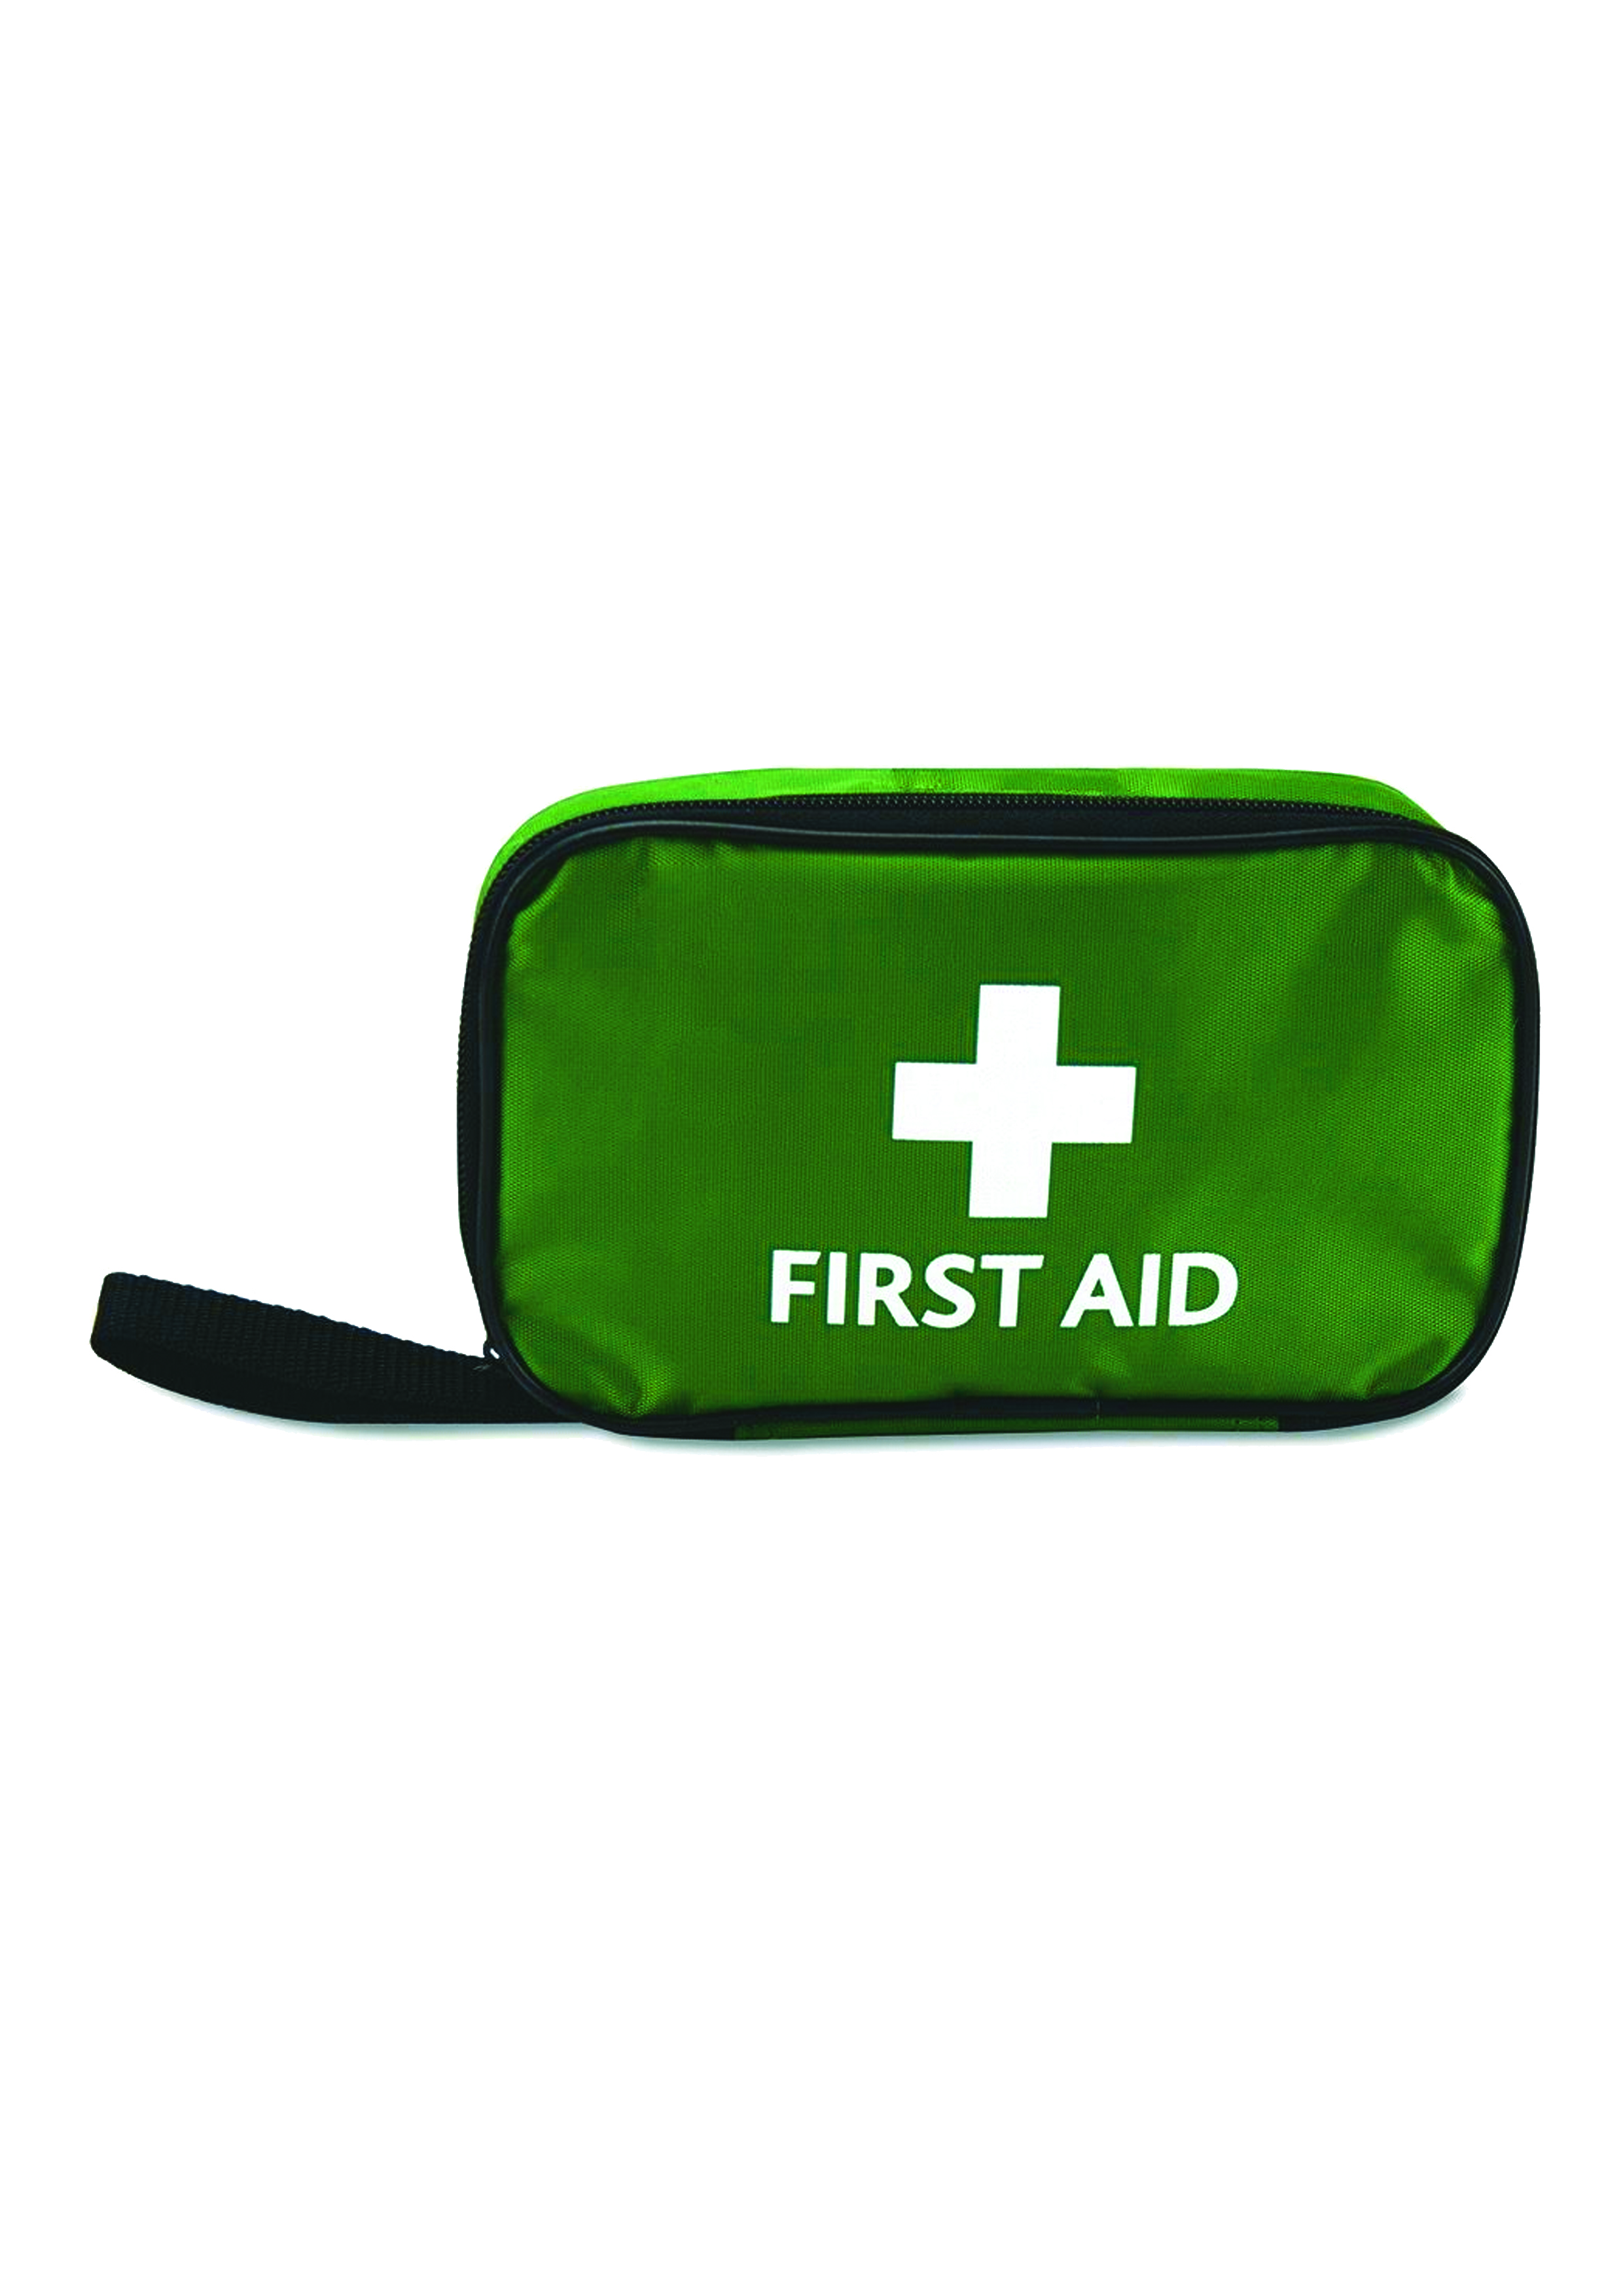 First Aid Kit one person